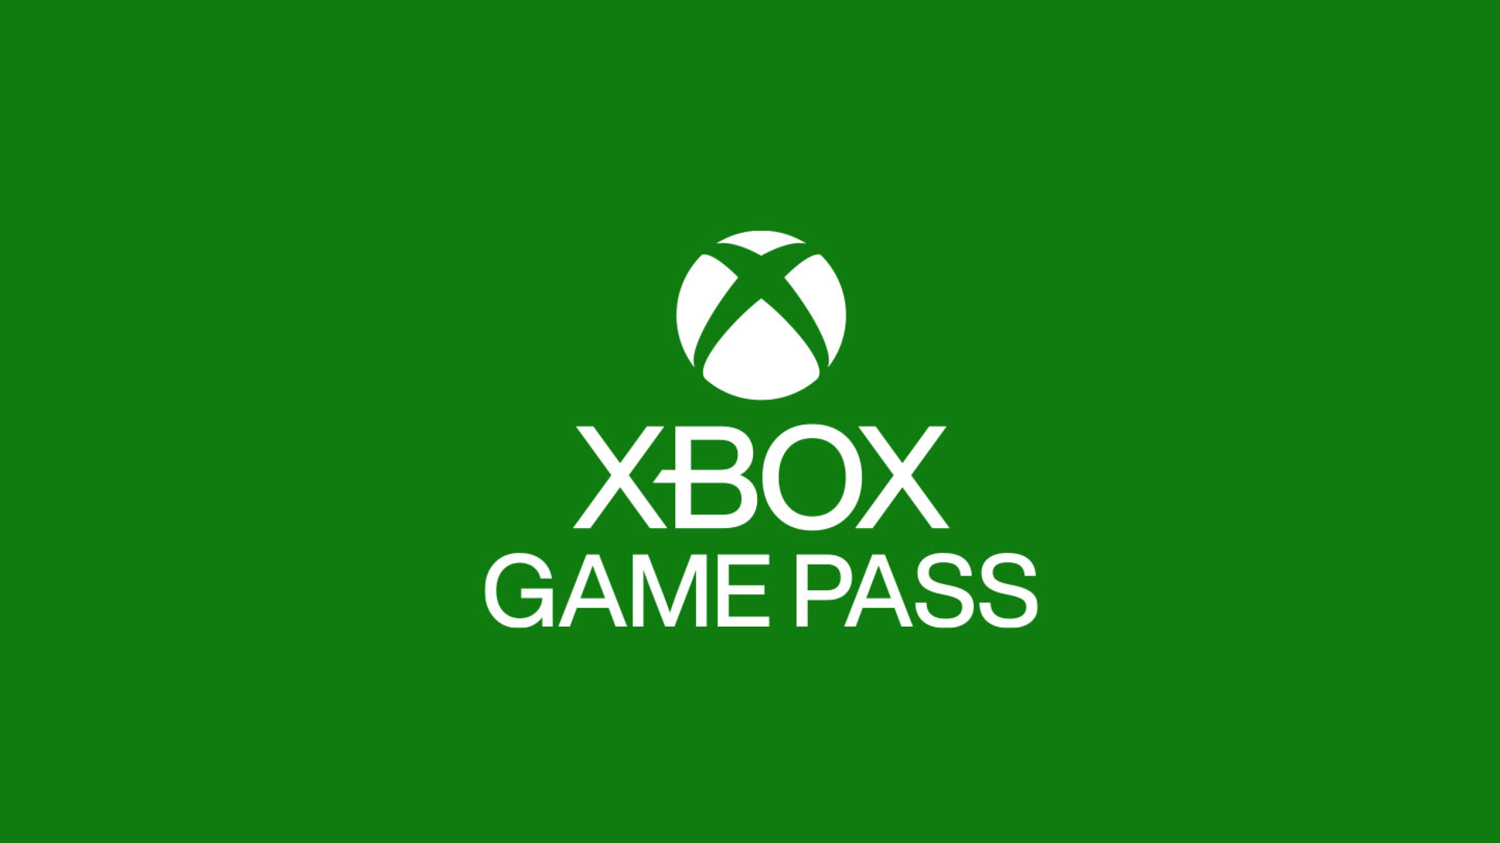 Microsoft insists Game Pass prices 'will not increase as a result